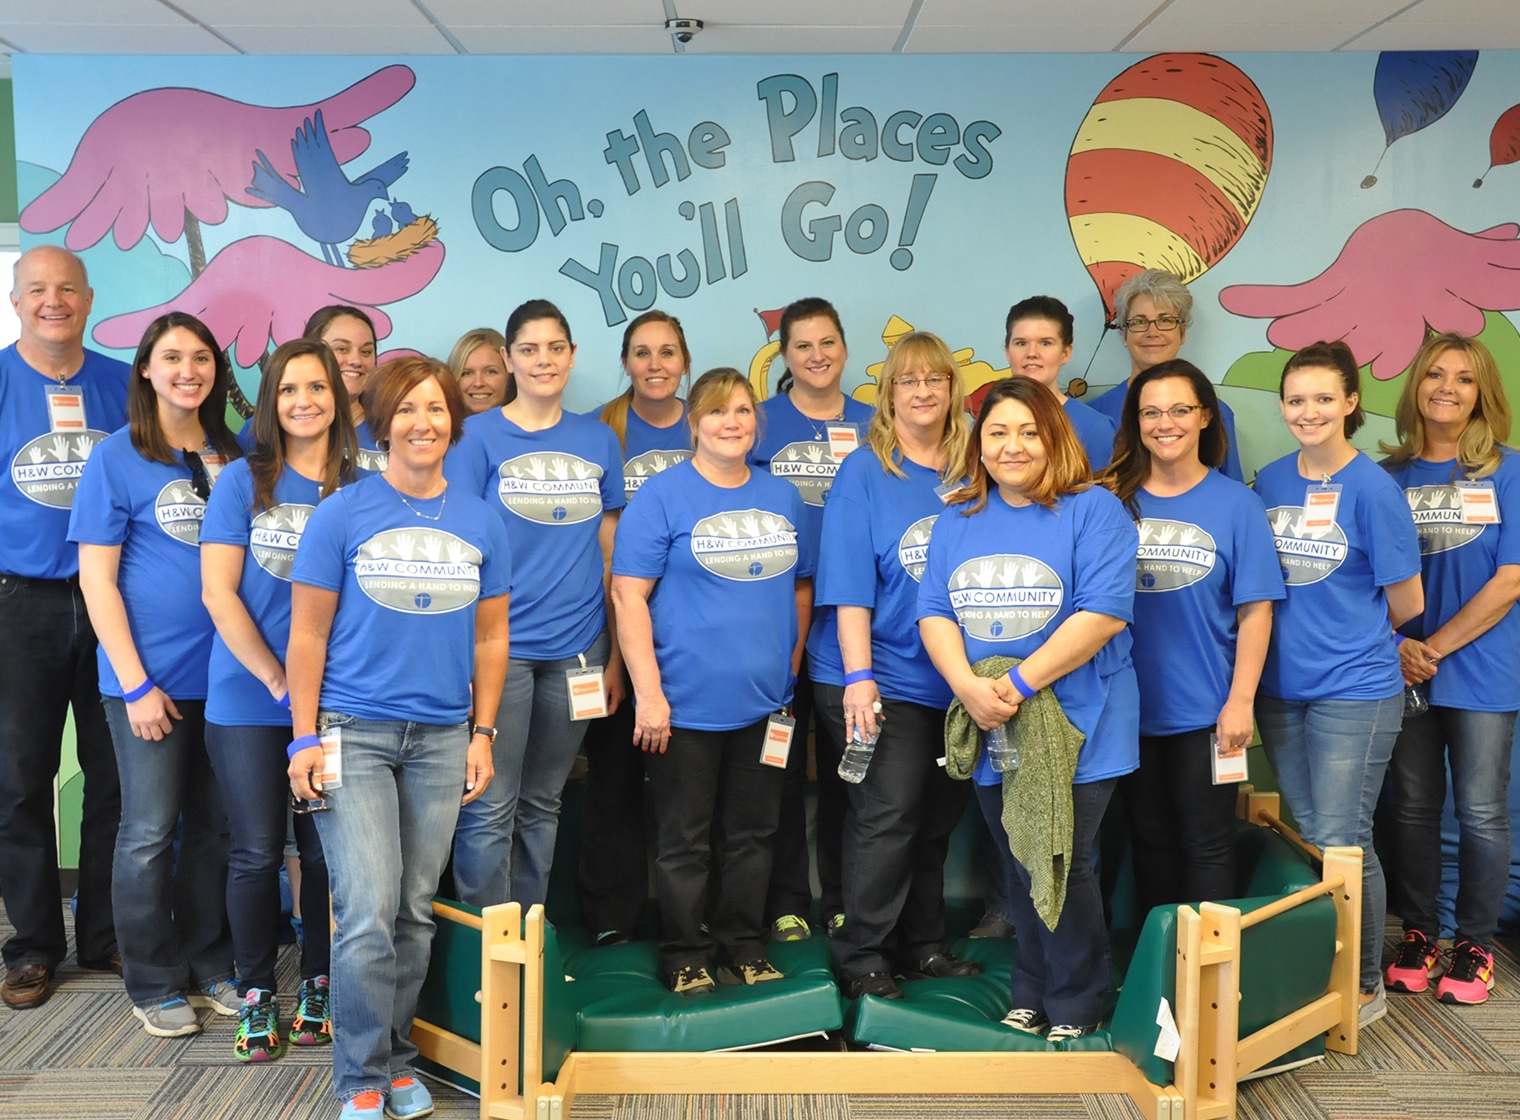 A group of people in blue t - shirts standing in a room with dr seuss.